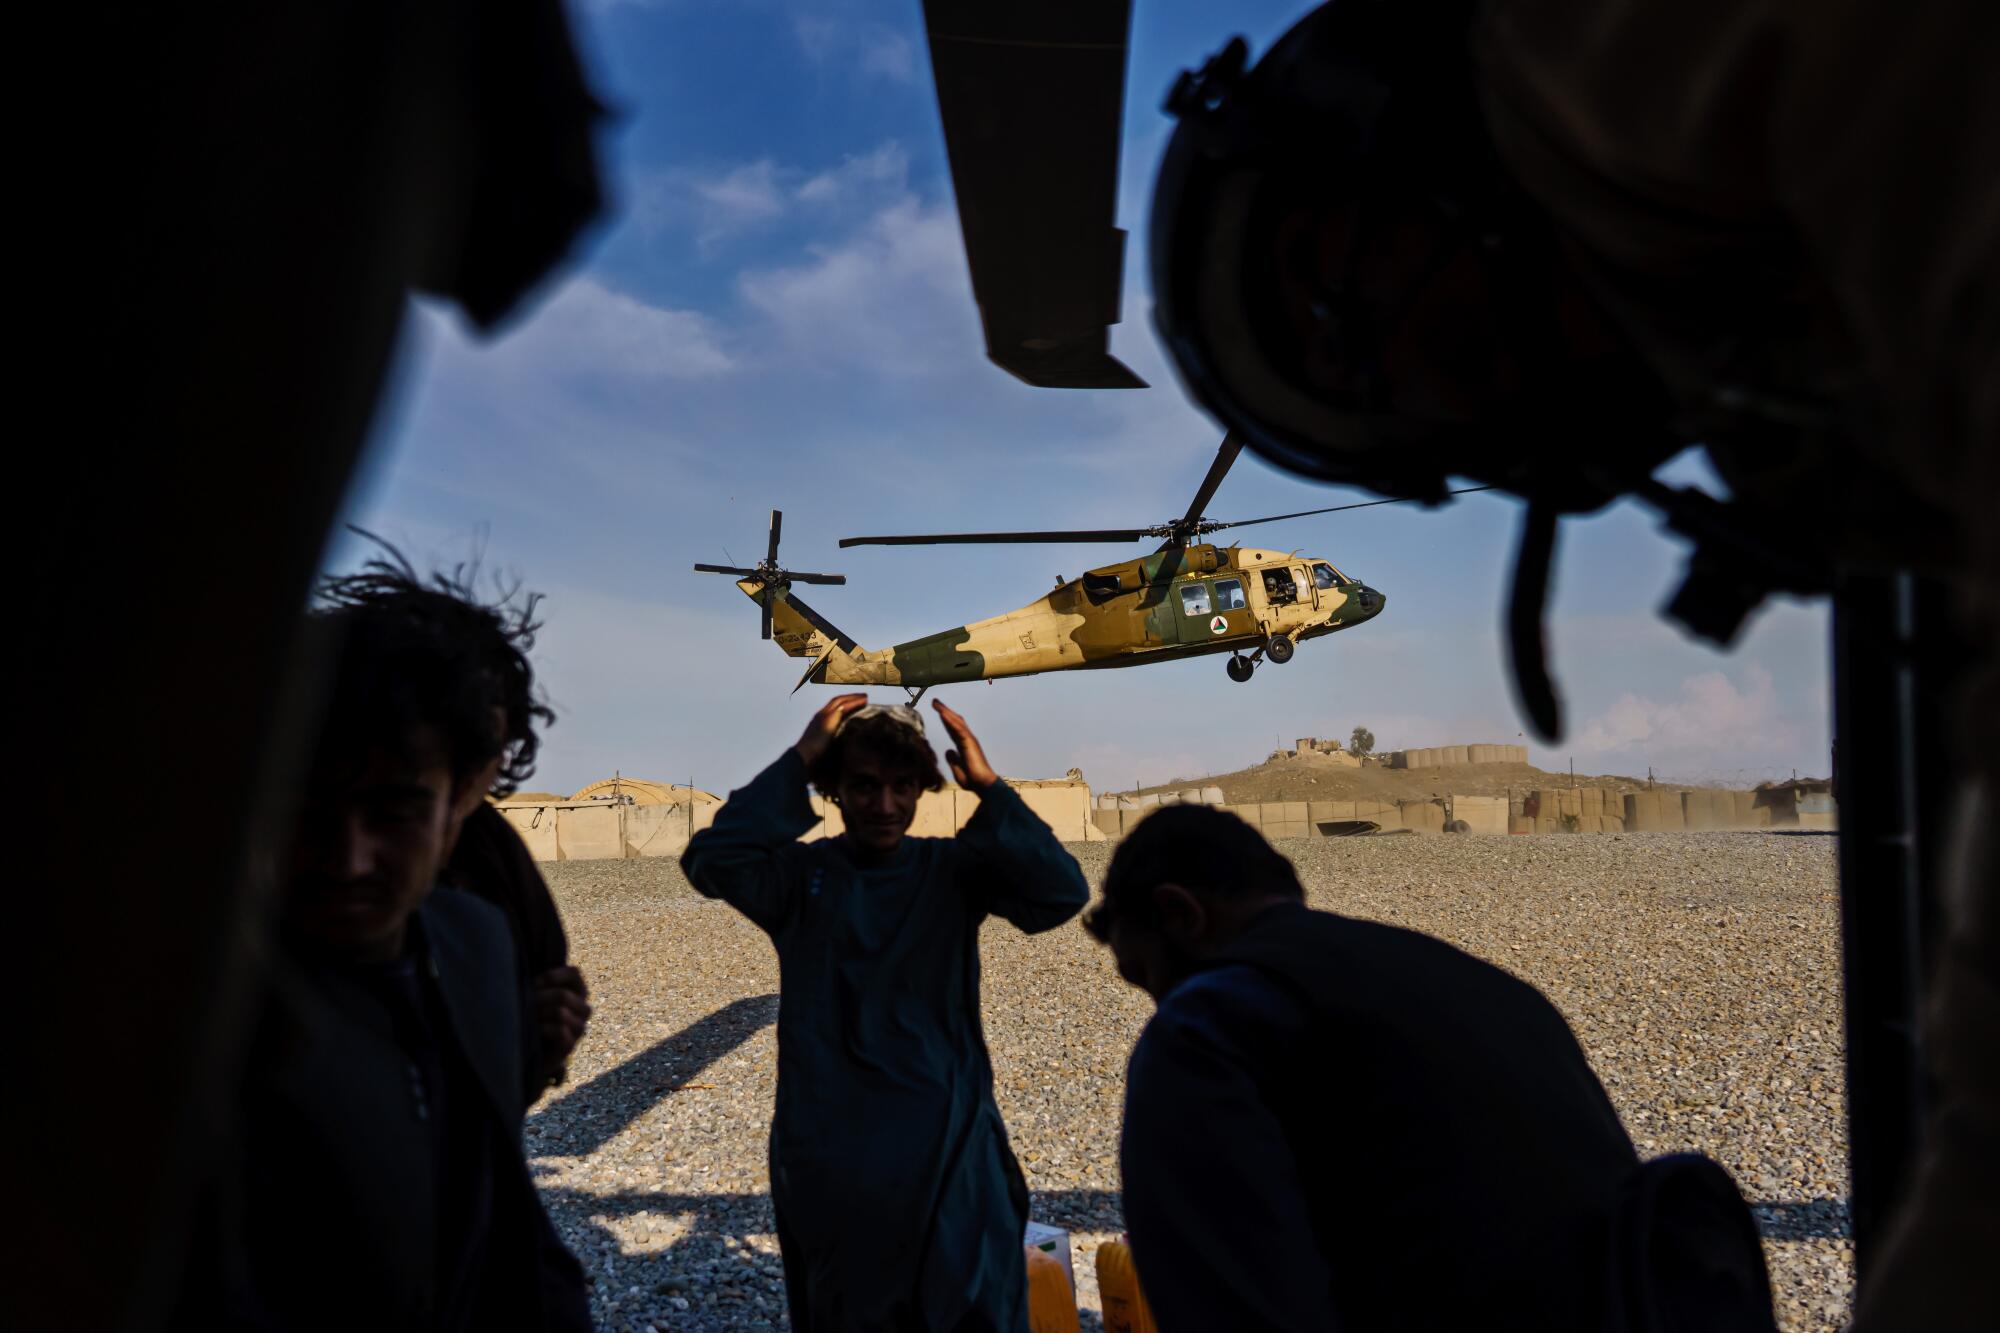  During a resupply mission, a UH-60 Black Hawk arrives at an outpost in the Shah Wali Kot district 